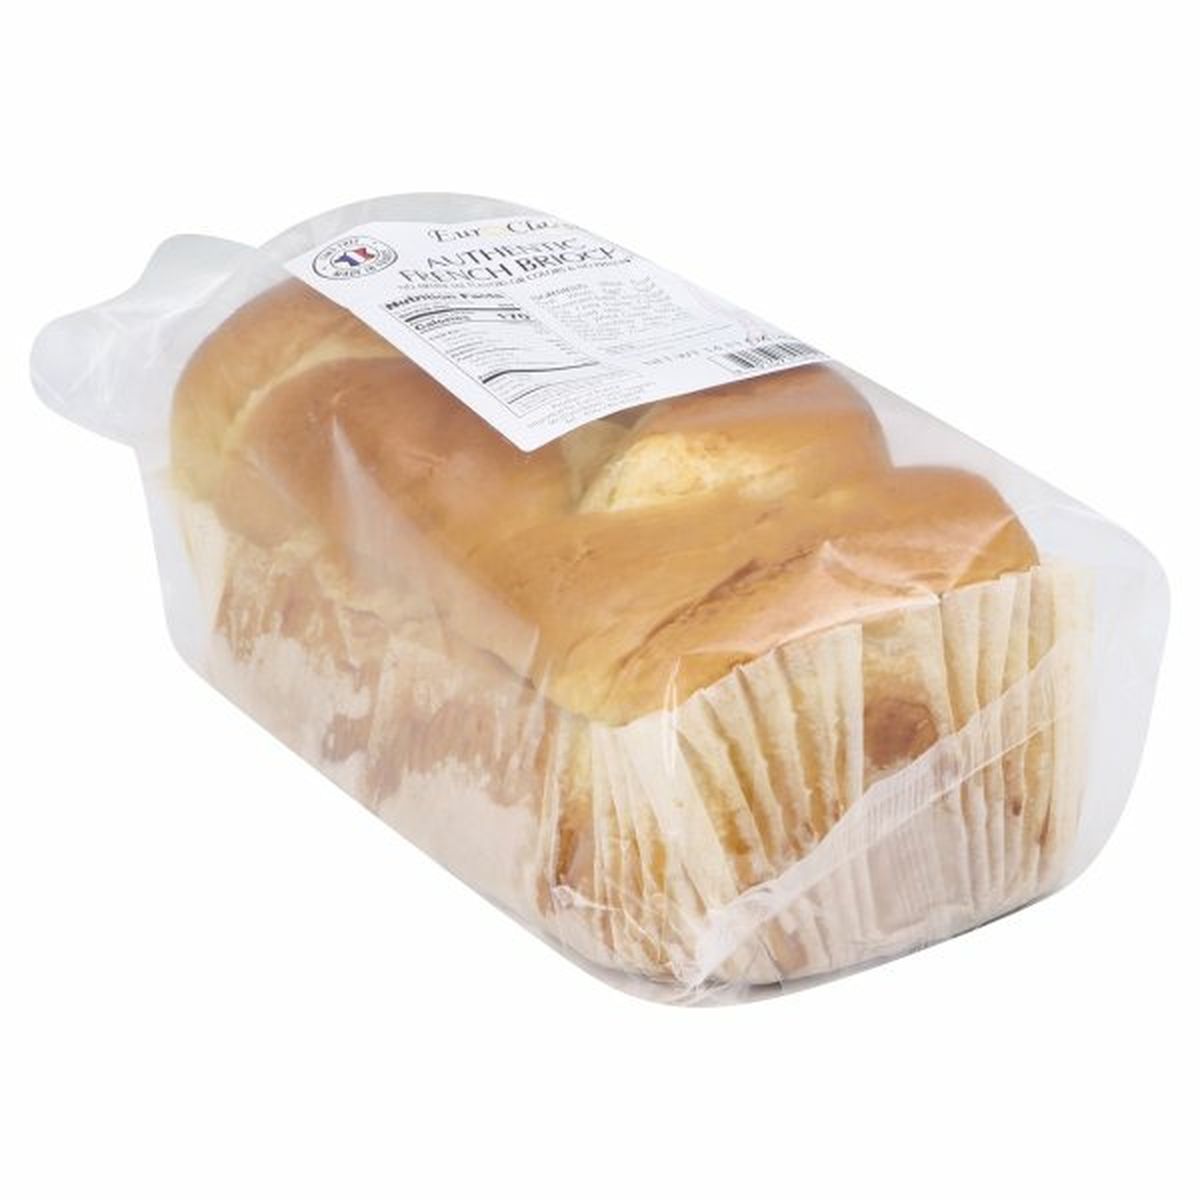 Calories in Euro Classic Imports Brioche, Authentic French